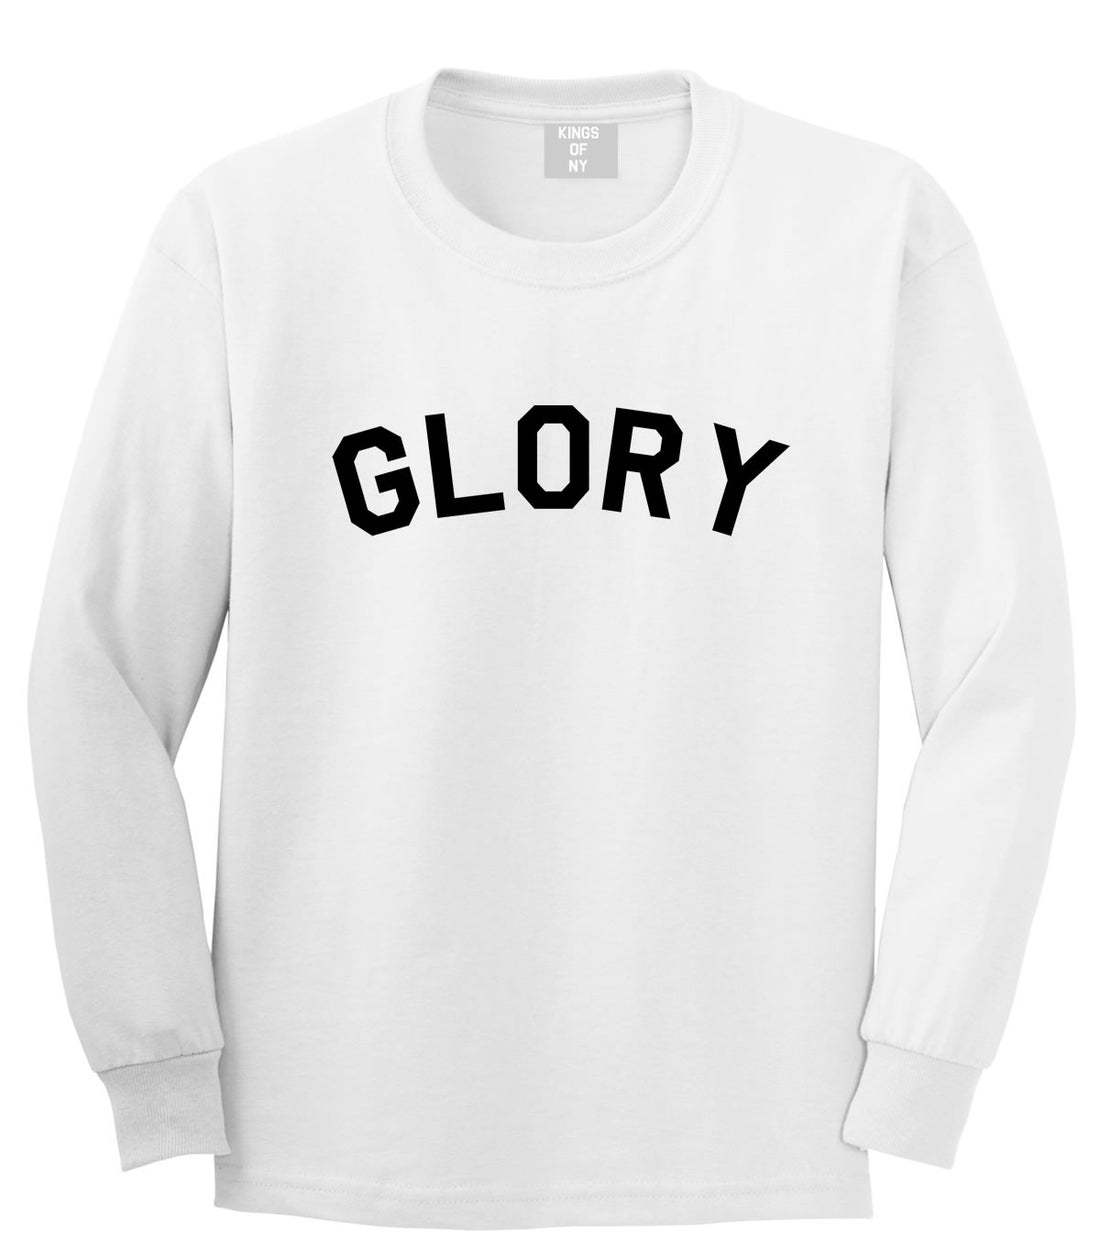 GLORY New York Champs Jersey Long Sleeve T-Shirt in White